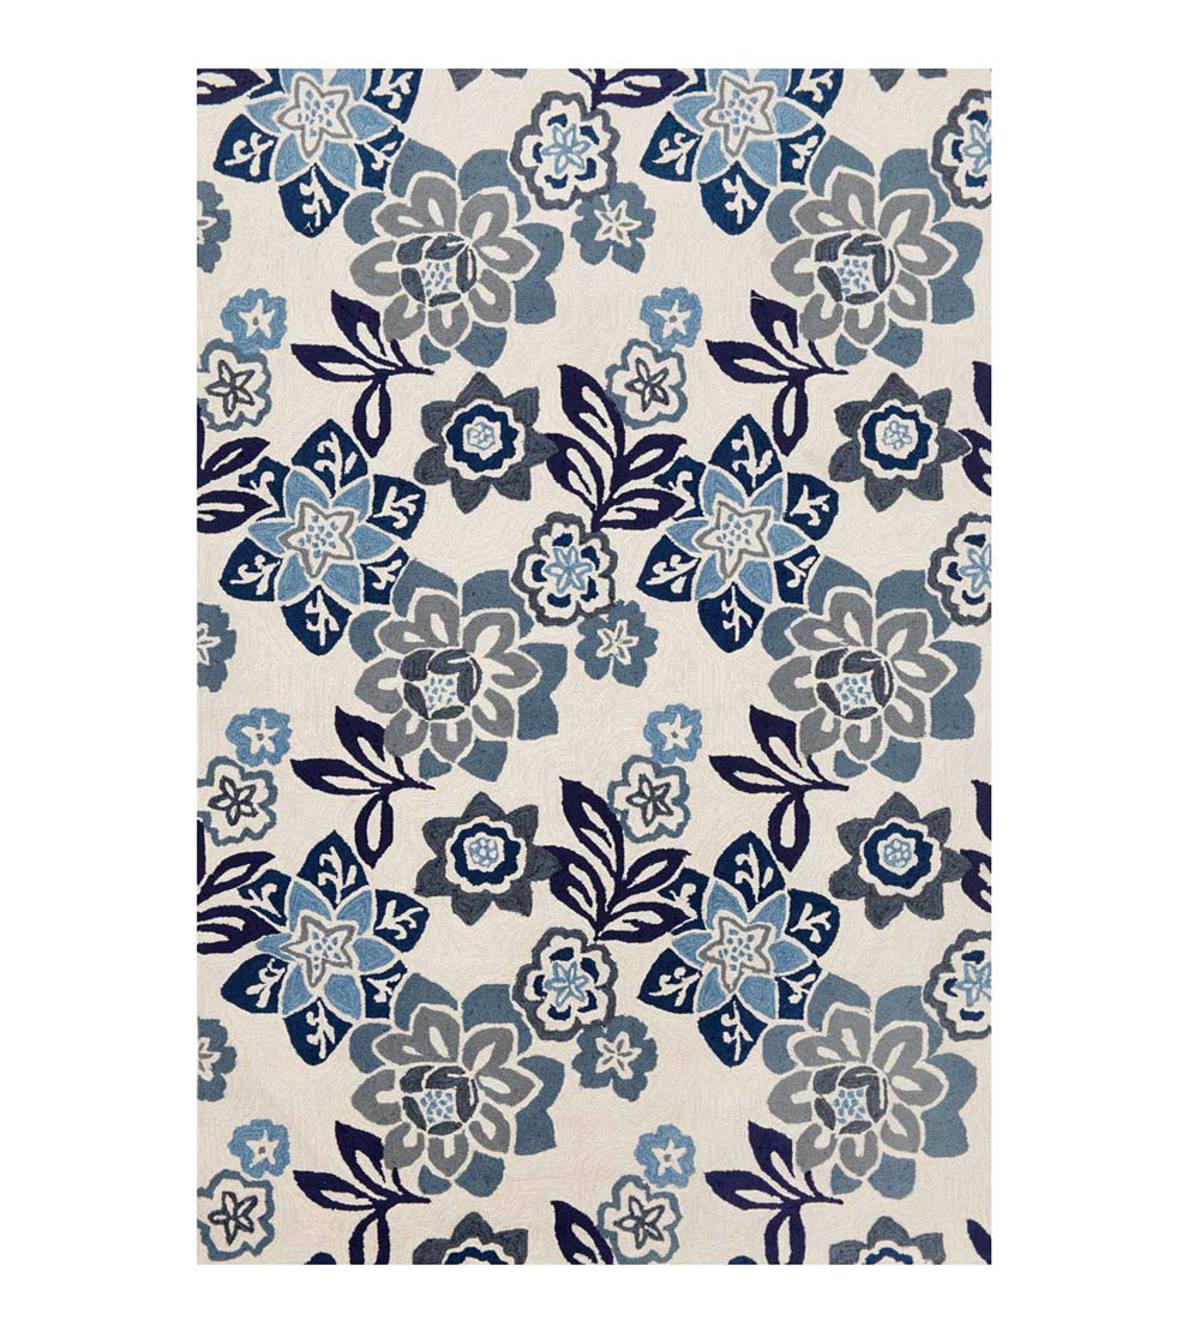 China Blue Floral Accent Rug, 5'W x 7'6"L